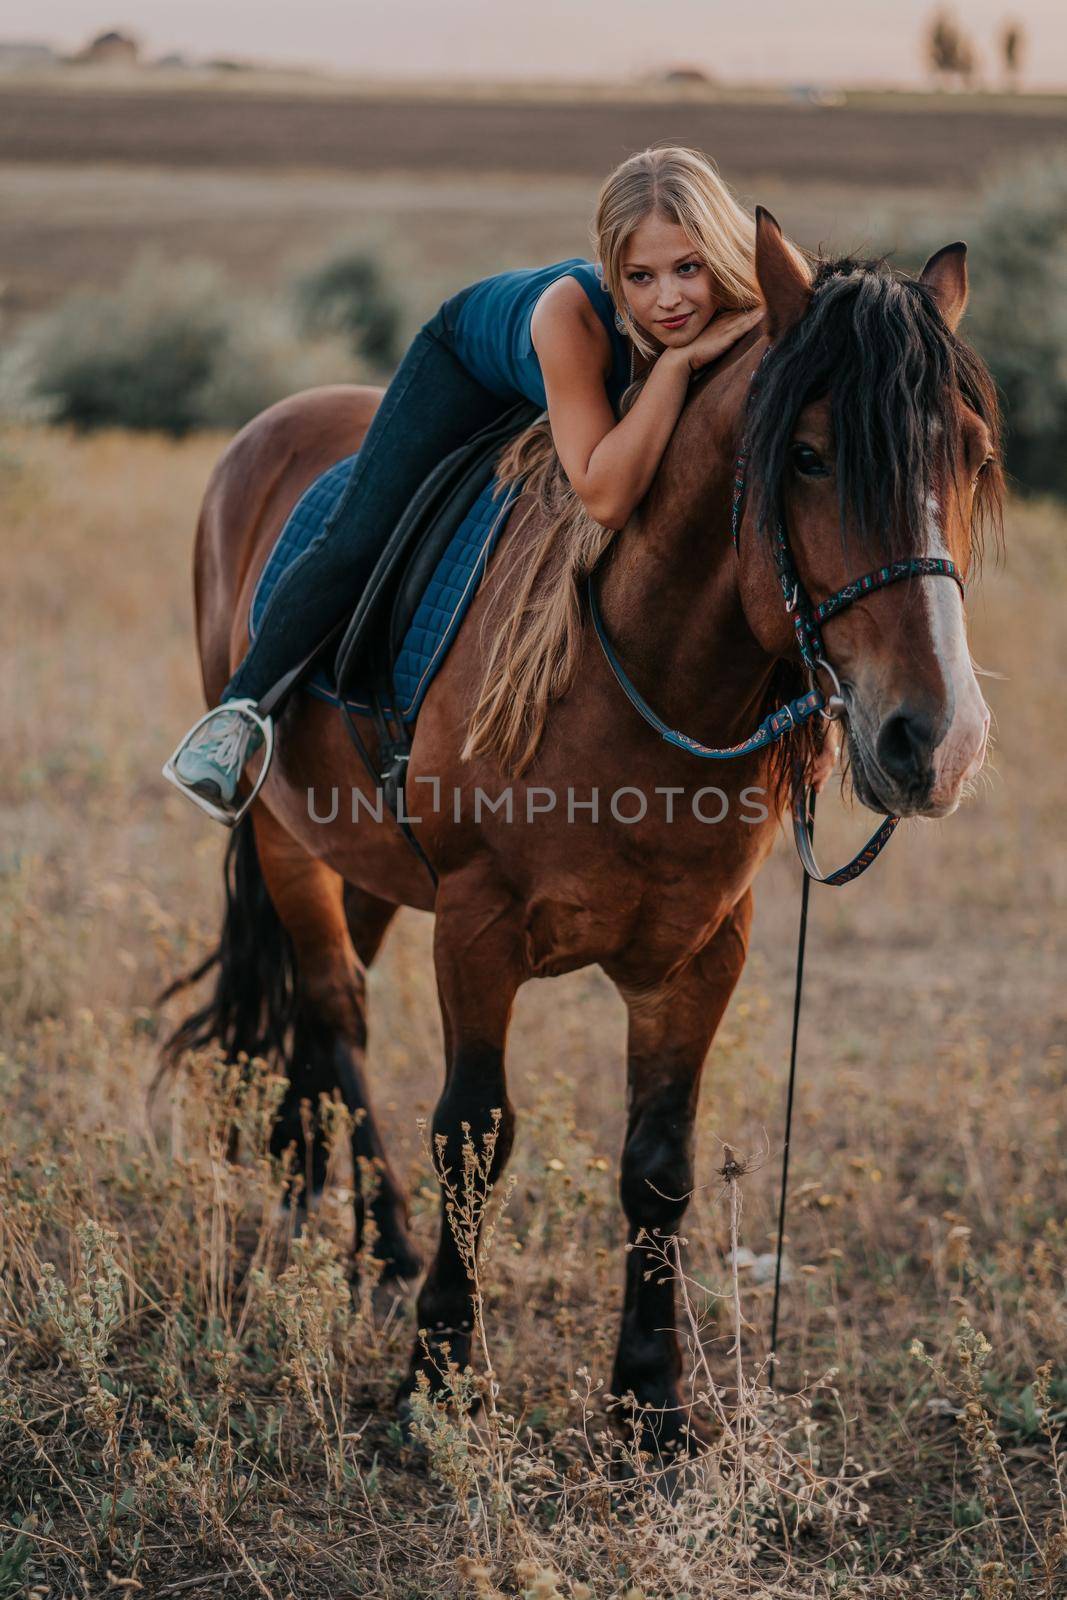 Pretty woman riding dark horse on field in fall. Concept of farm animals, training, horse racing, nature. High quality photo